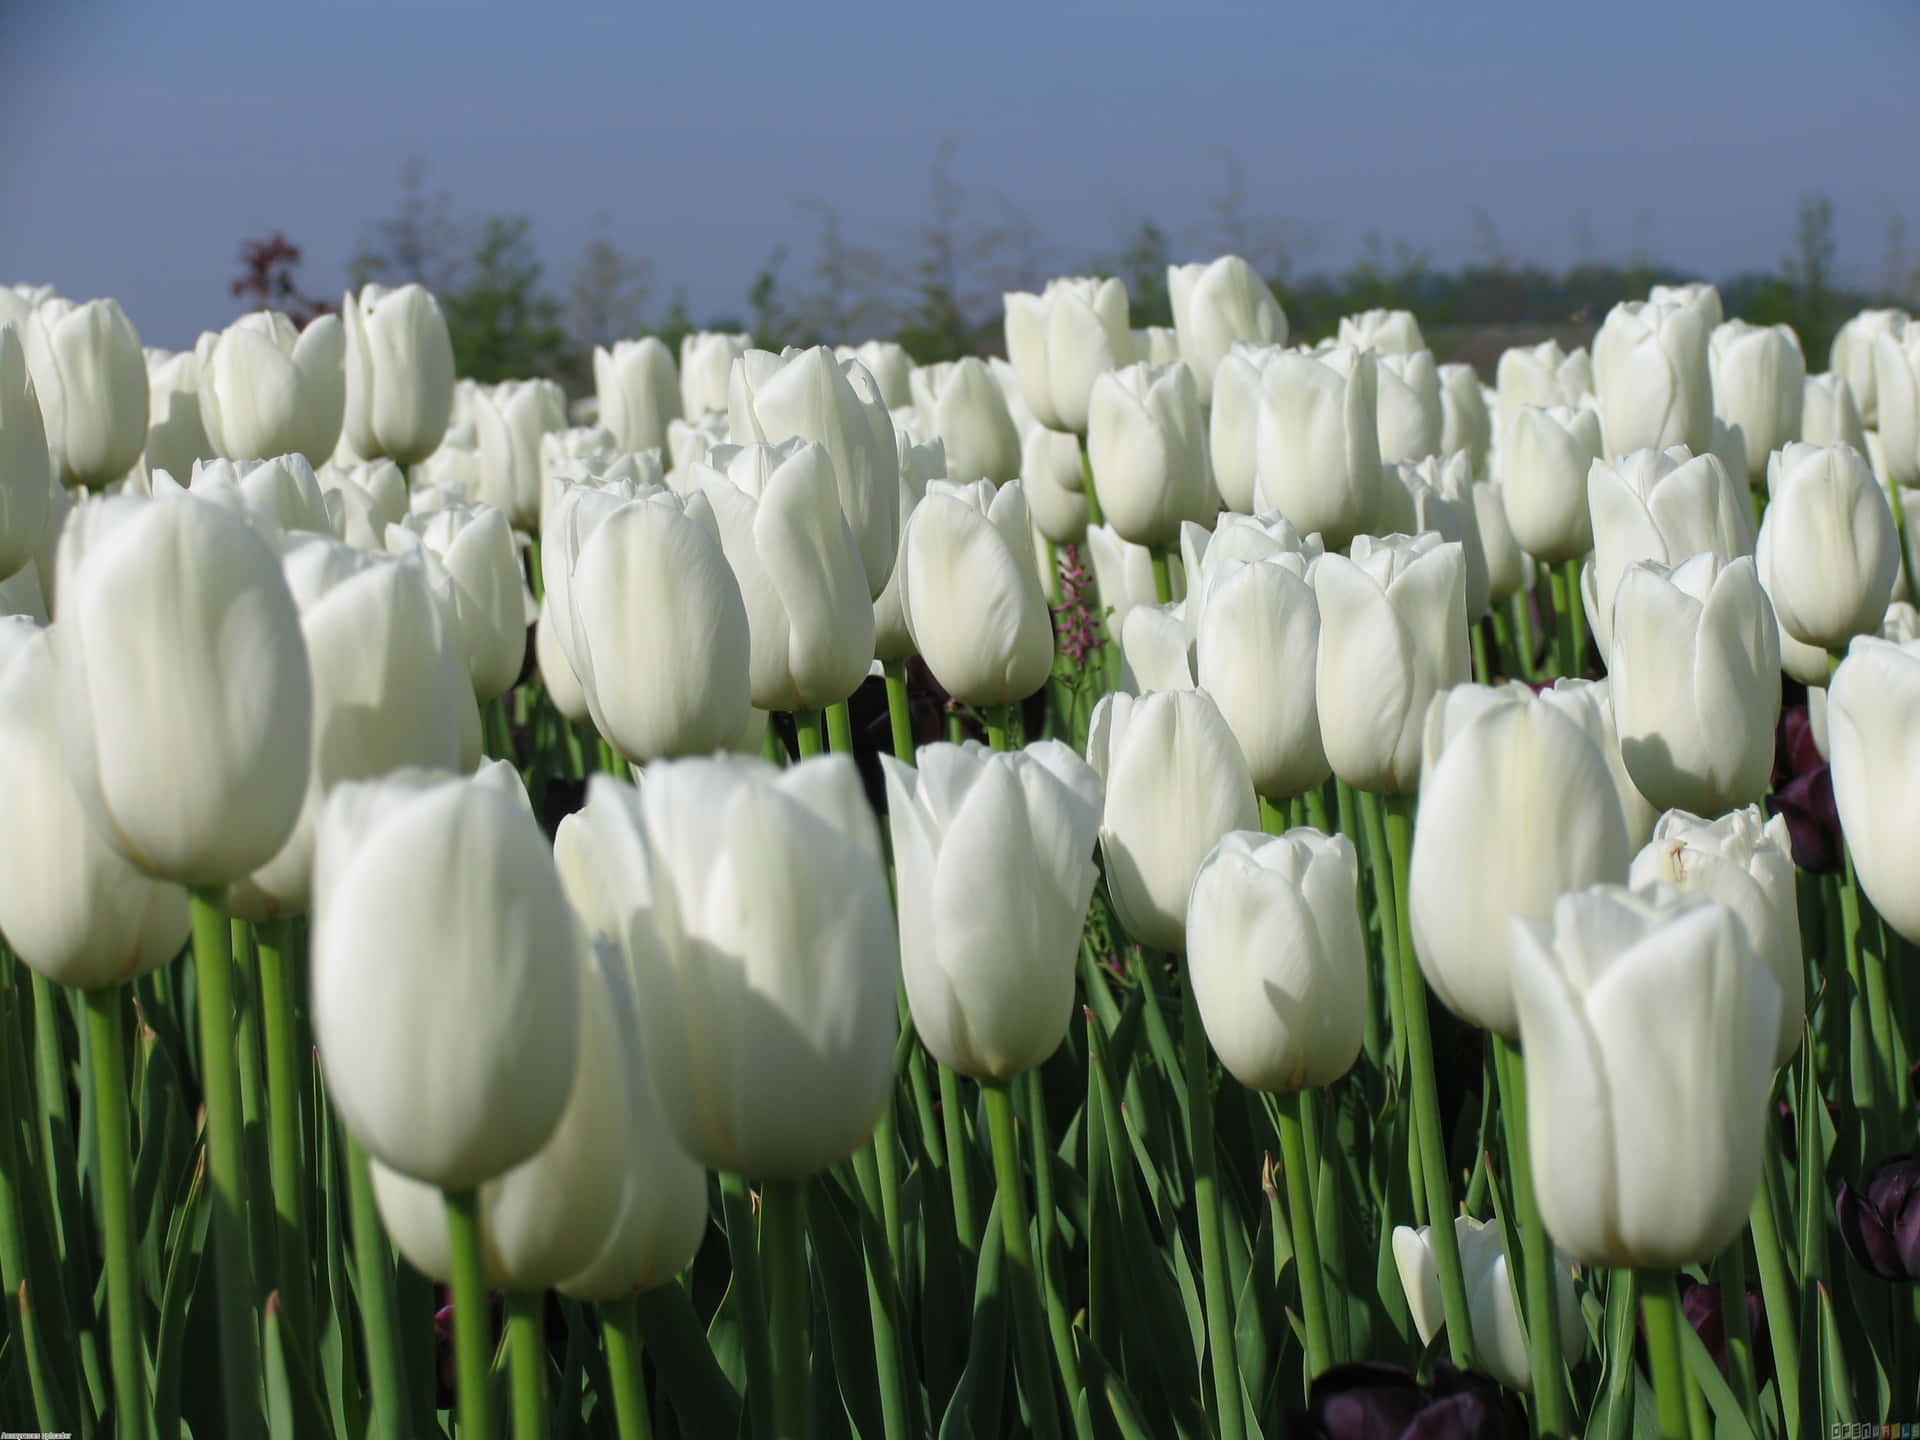 A field of vibrant Tulips to brighten your day!